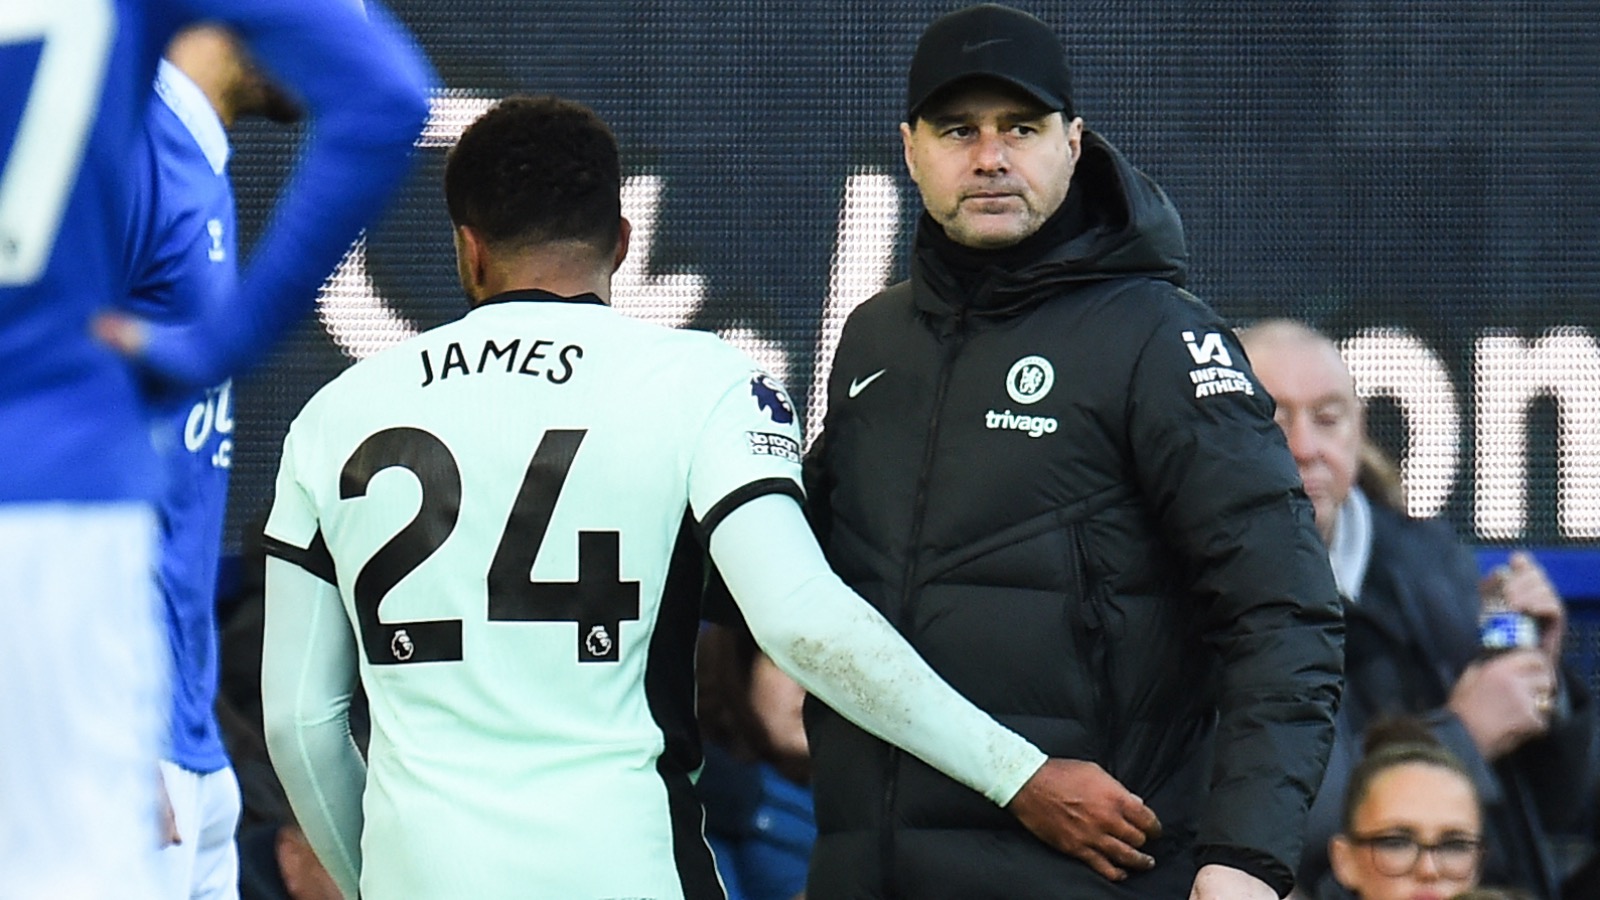 Chelsea Captain Reece James leaving match with hamstring injury